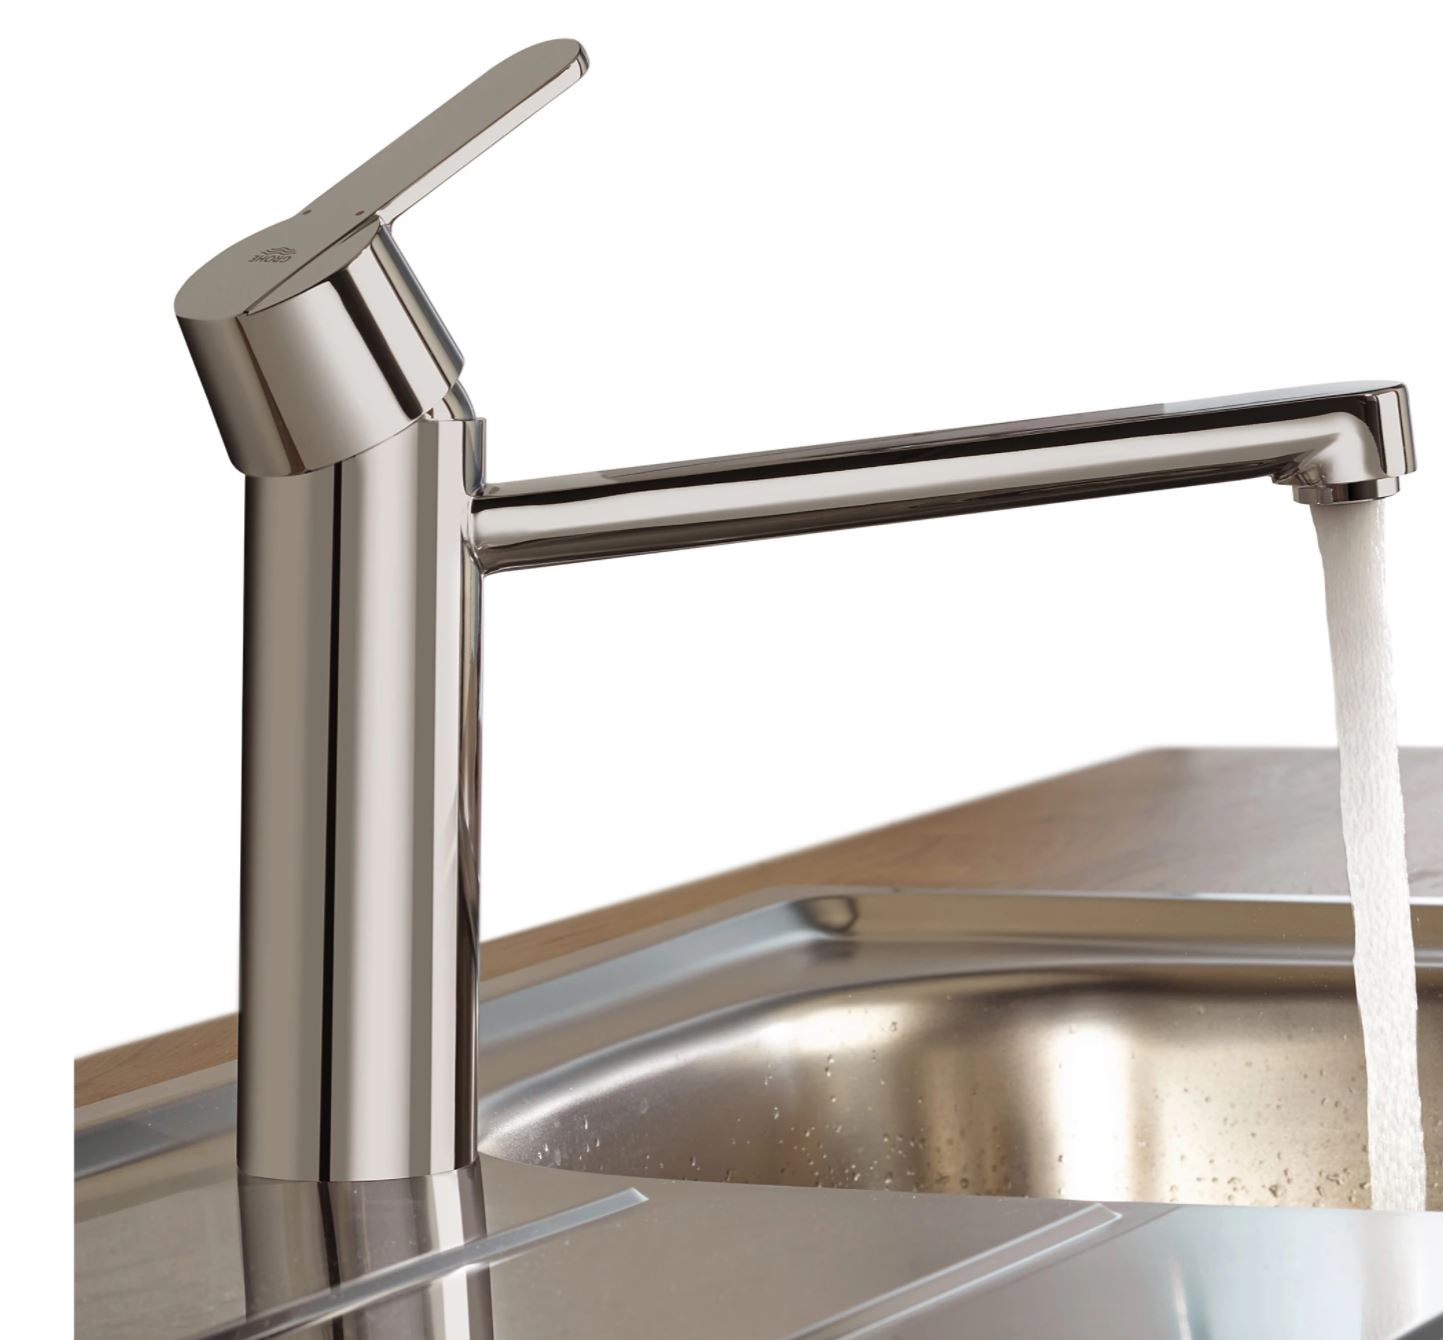 Grohe GET Stainless steel effect Kitchen Tap 7842